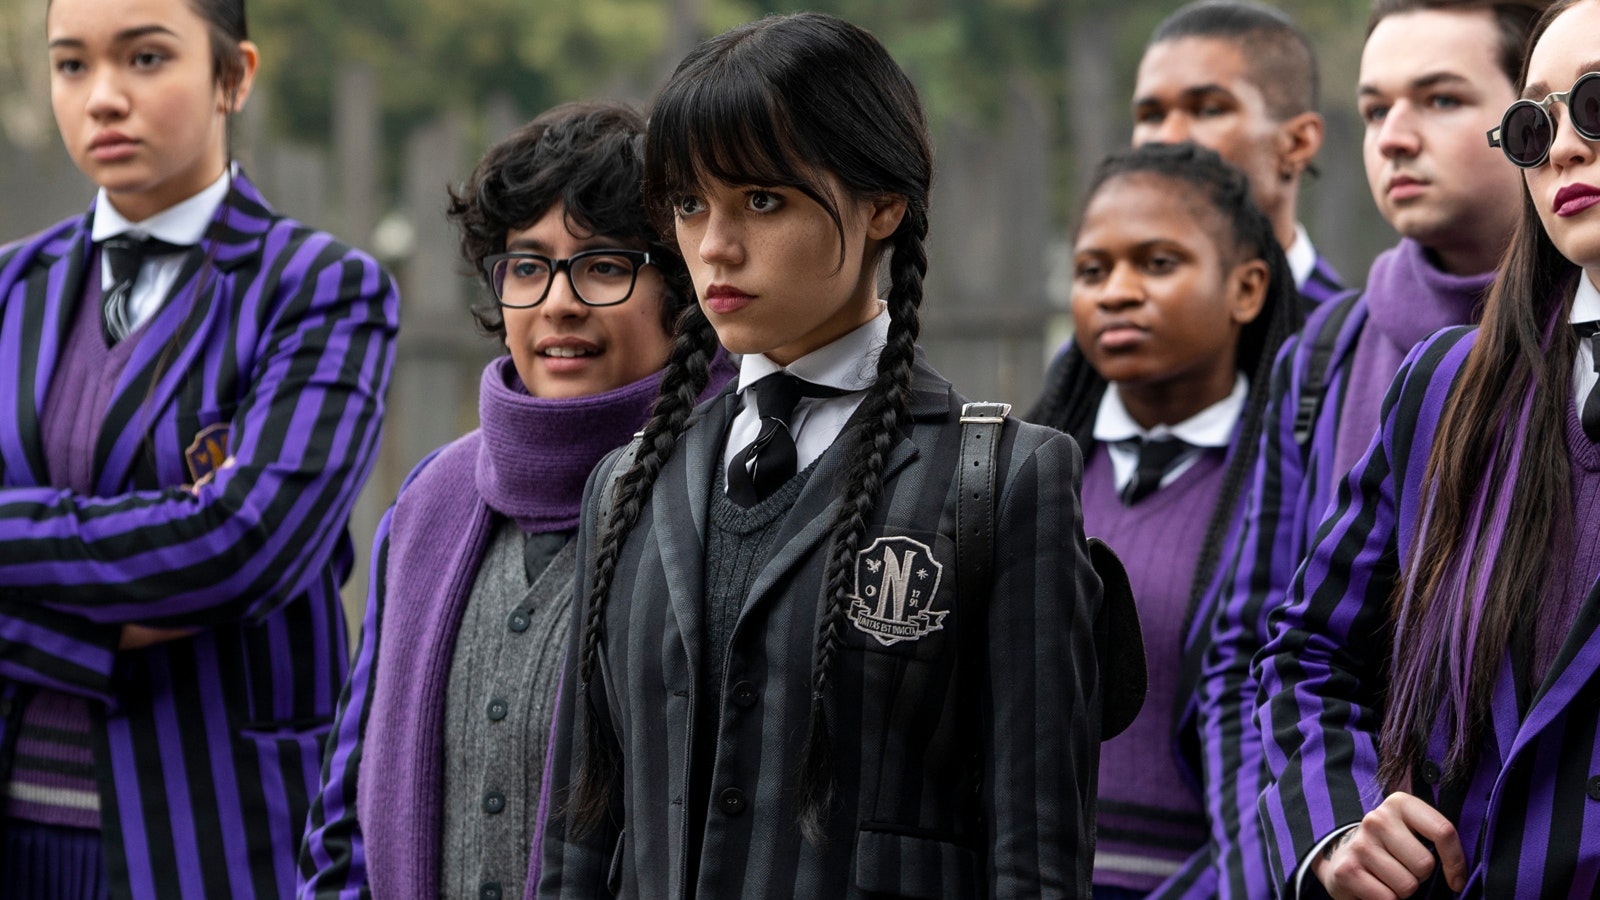 Wednesday, review: Tim Burton gives The Addams Family a Harry Potter  makeover